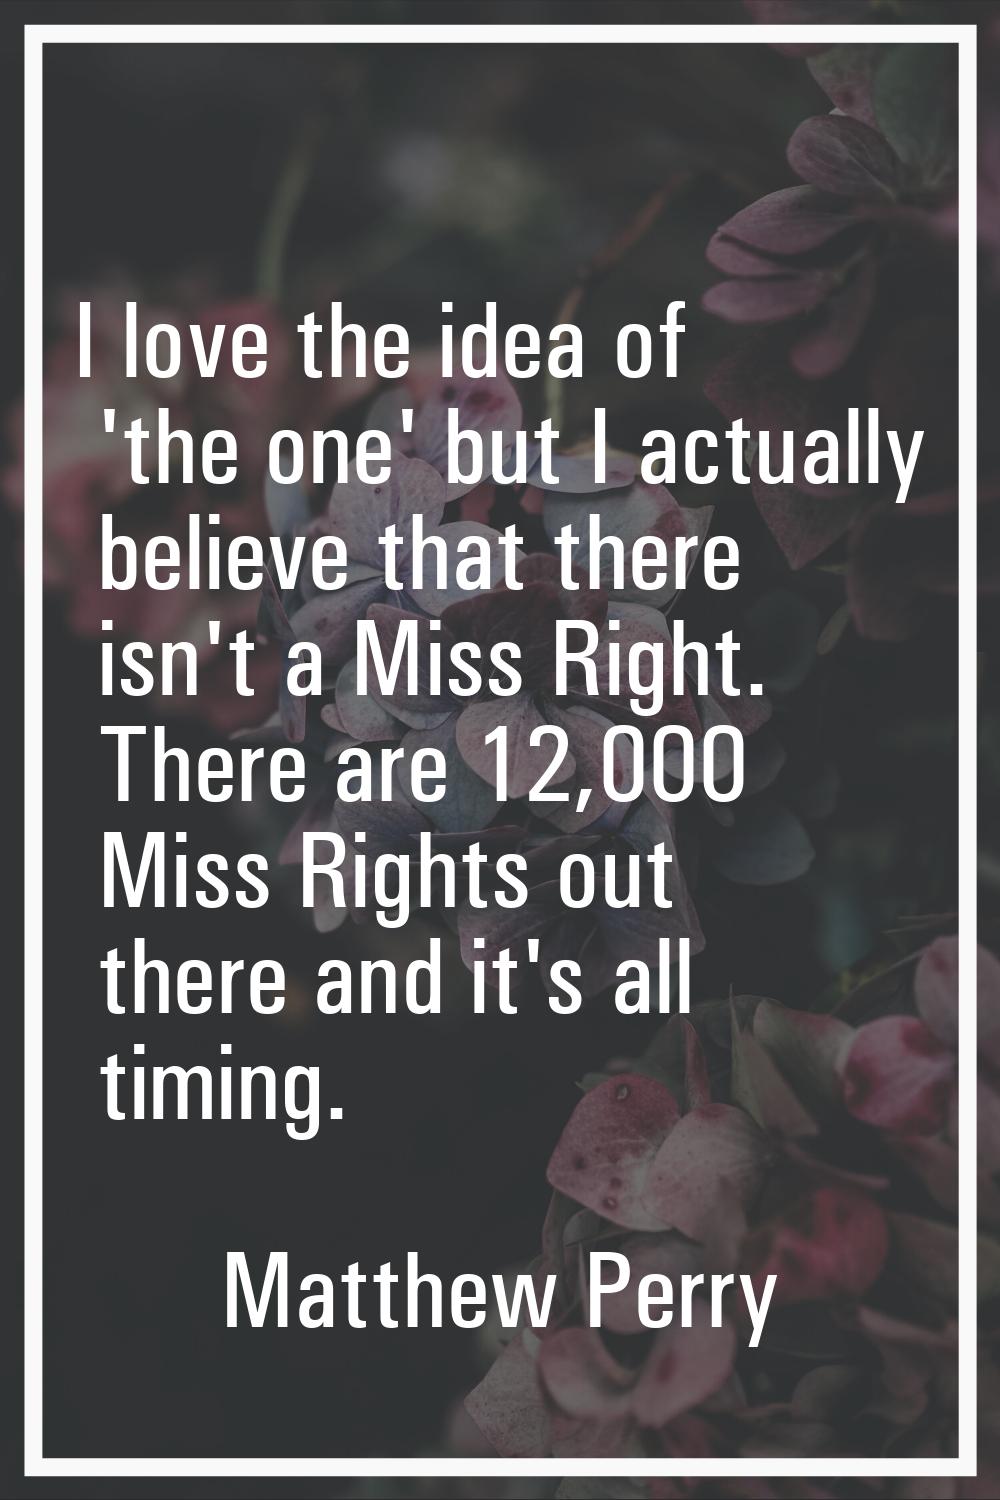 I love the idea of 'the one' but I actually believe that there isn't a Miss Right. There are 12,000